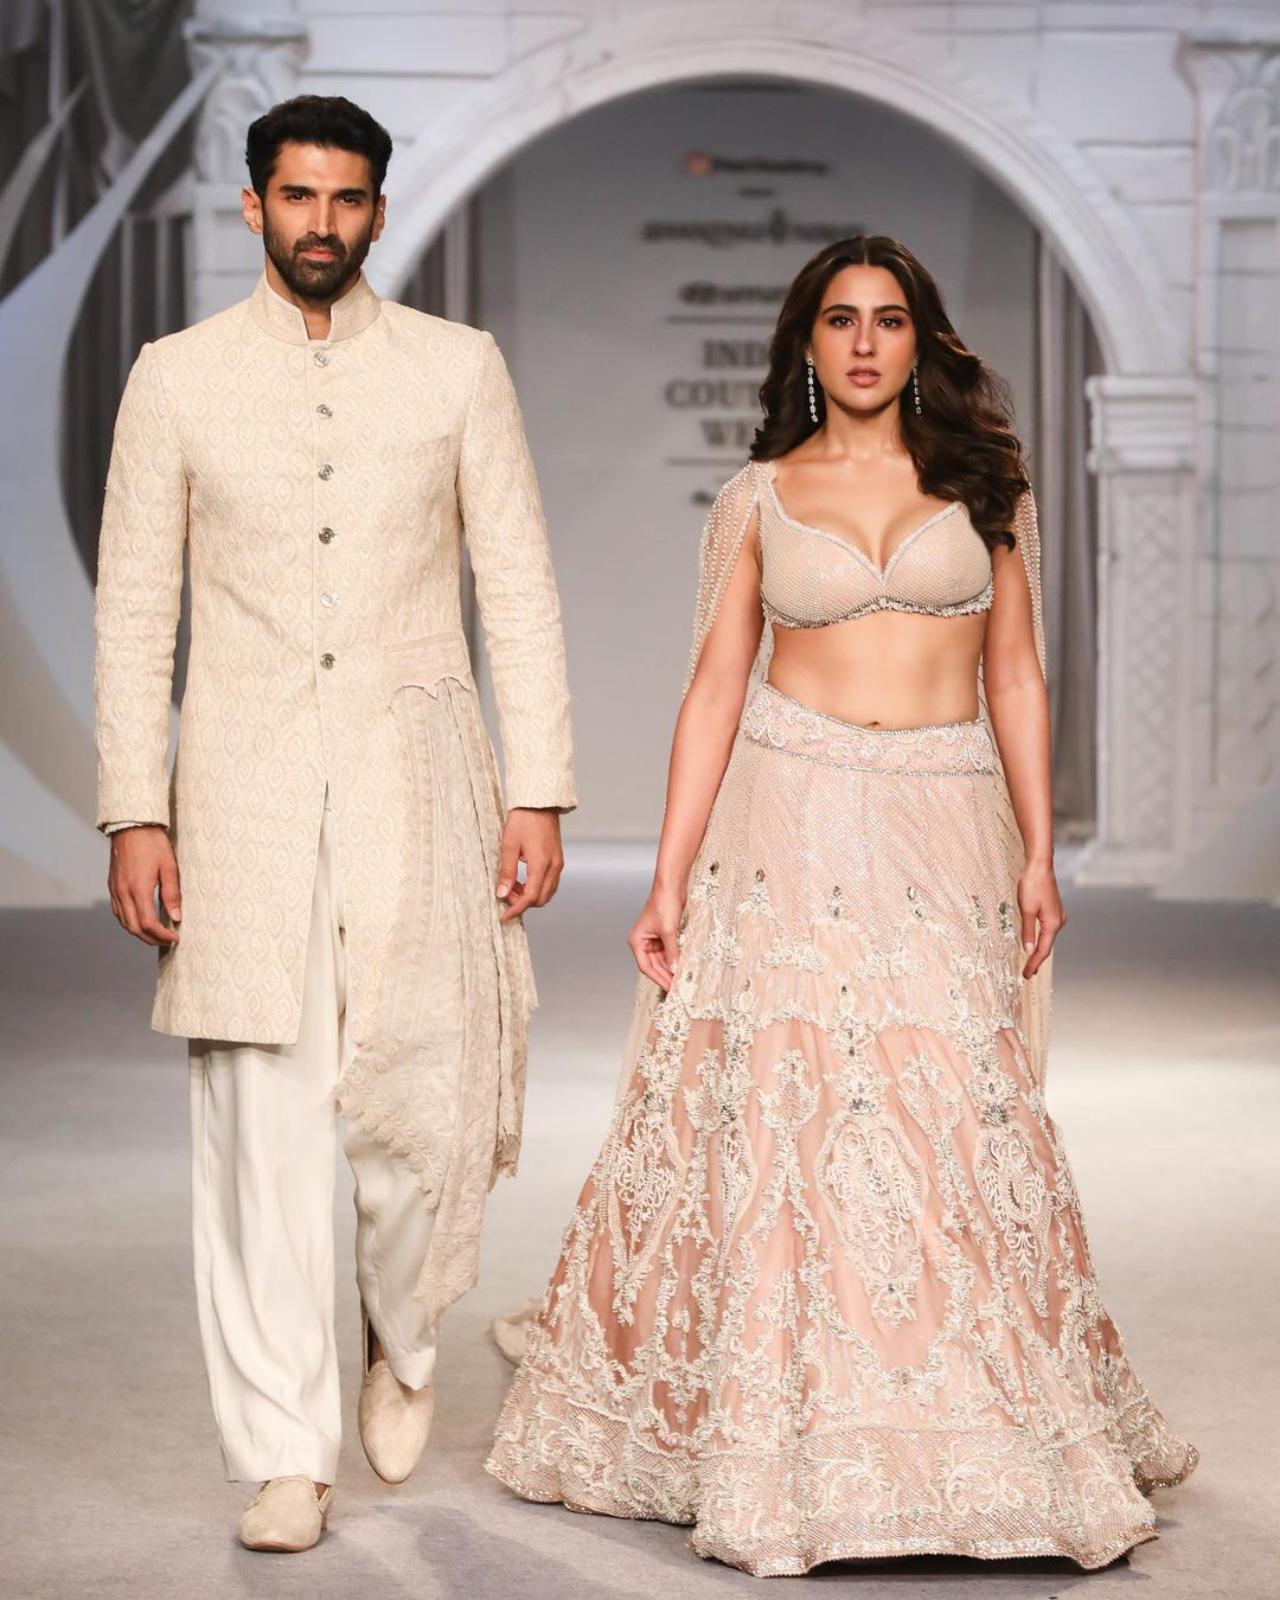 Aditya Roy Kapur and Sara Ali Khan turned showstoppers for the 'Etheria' collection. Sara dazzled audiences in her intricately embroidered cream-coloured lehenga. Aditya swept the stage in his uniquely asymmetrical royal bandhgala